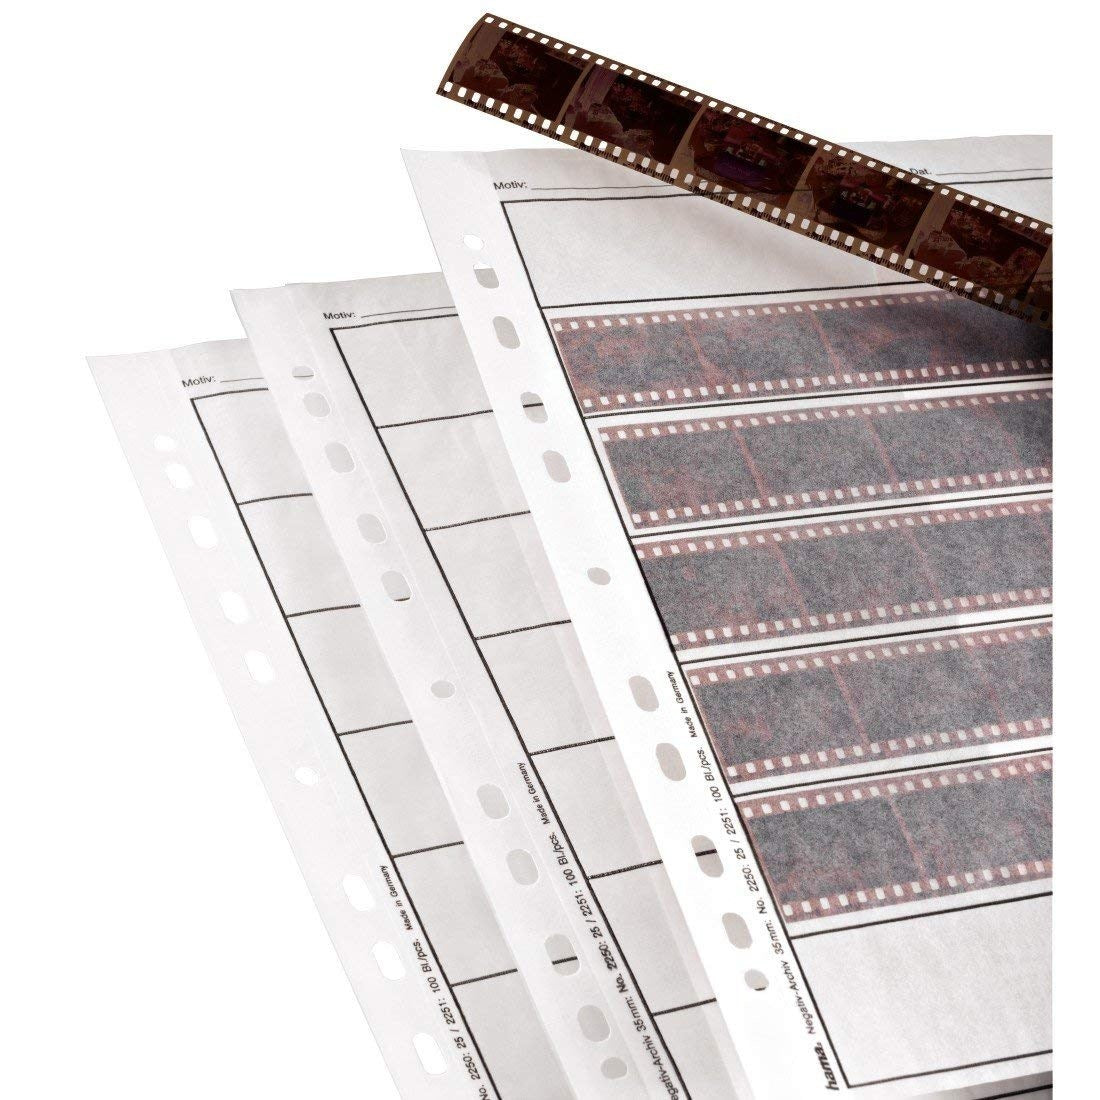 Product Image of Hama 2250 Negative File Storage Sleeves, each holding 7 strips of 6 (24 x 36 mm) Frames, Glassine (Pack of 25)